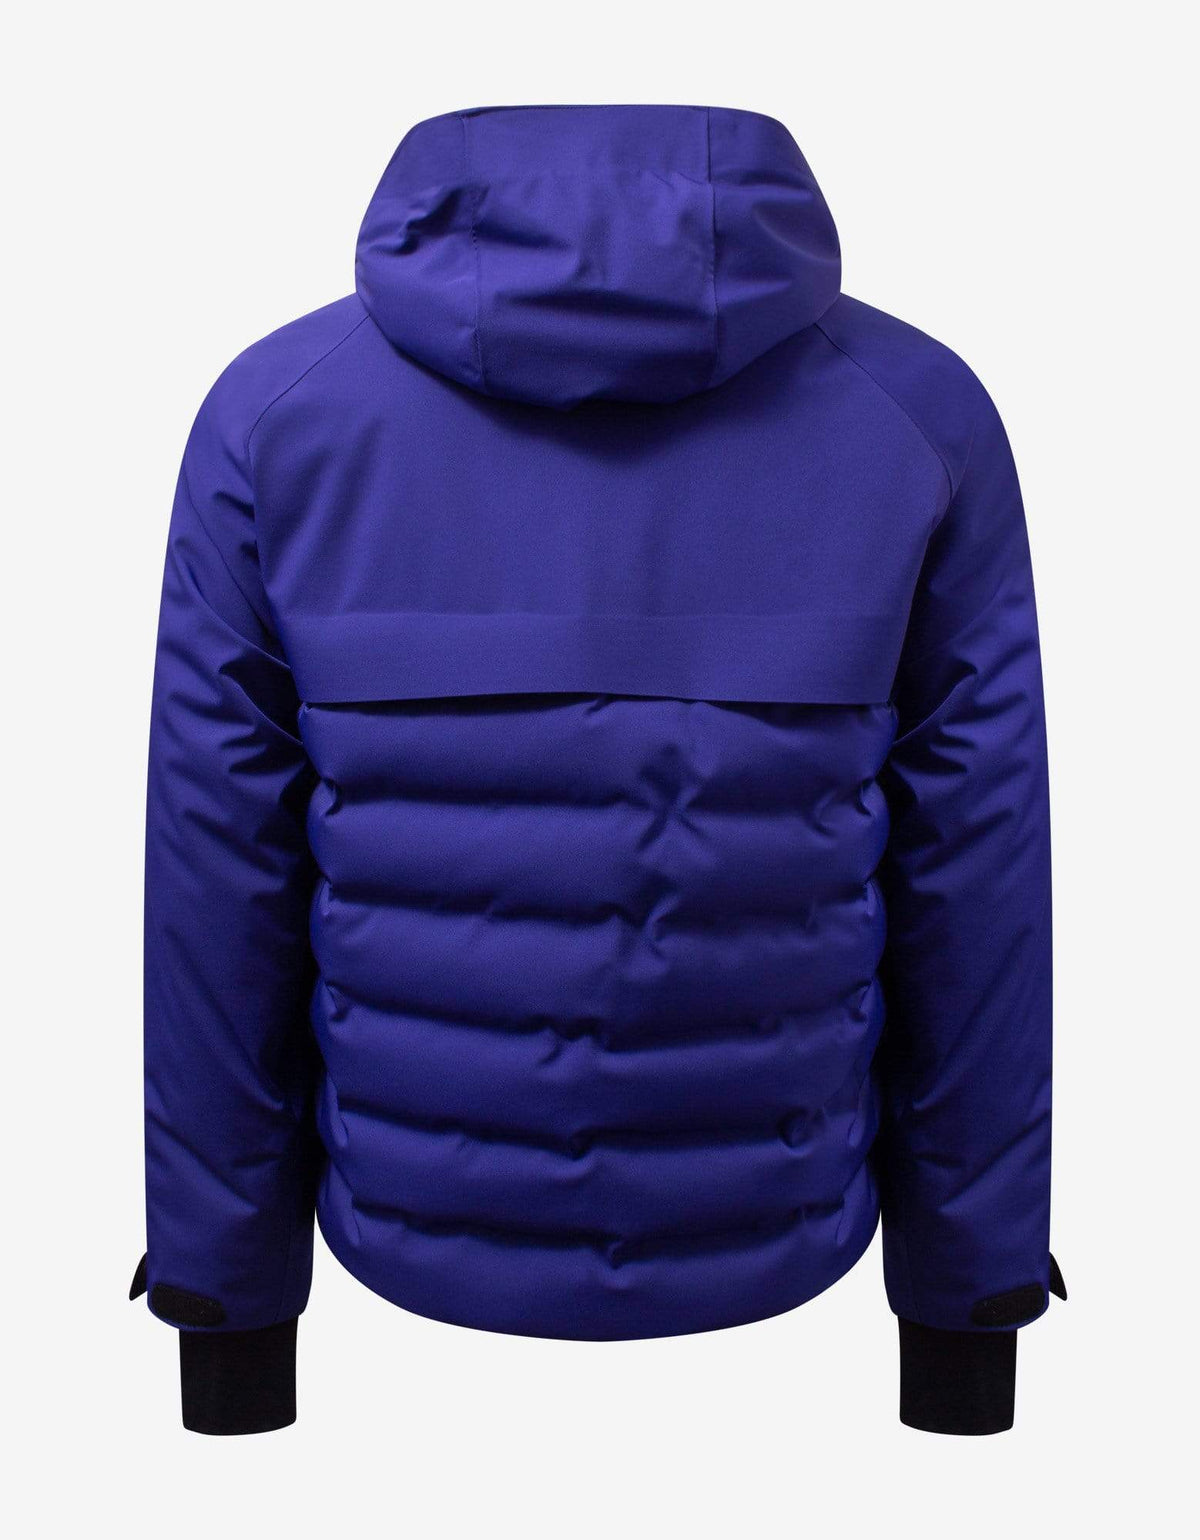 Moncler Grenoble Achensee Blue Down Jacket